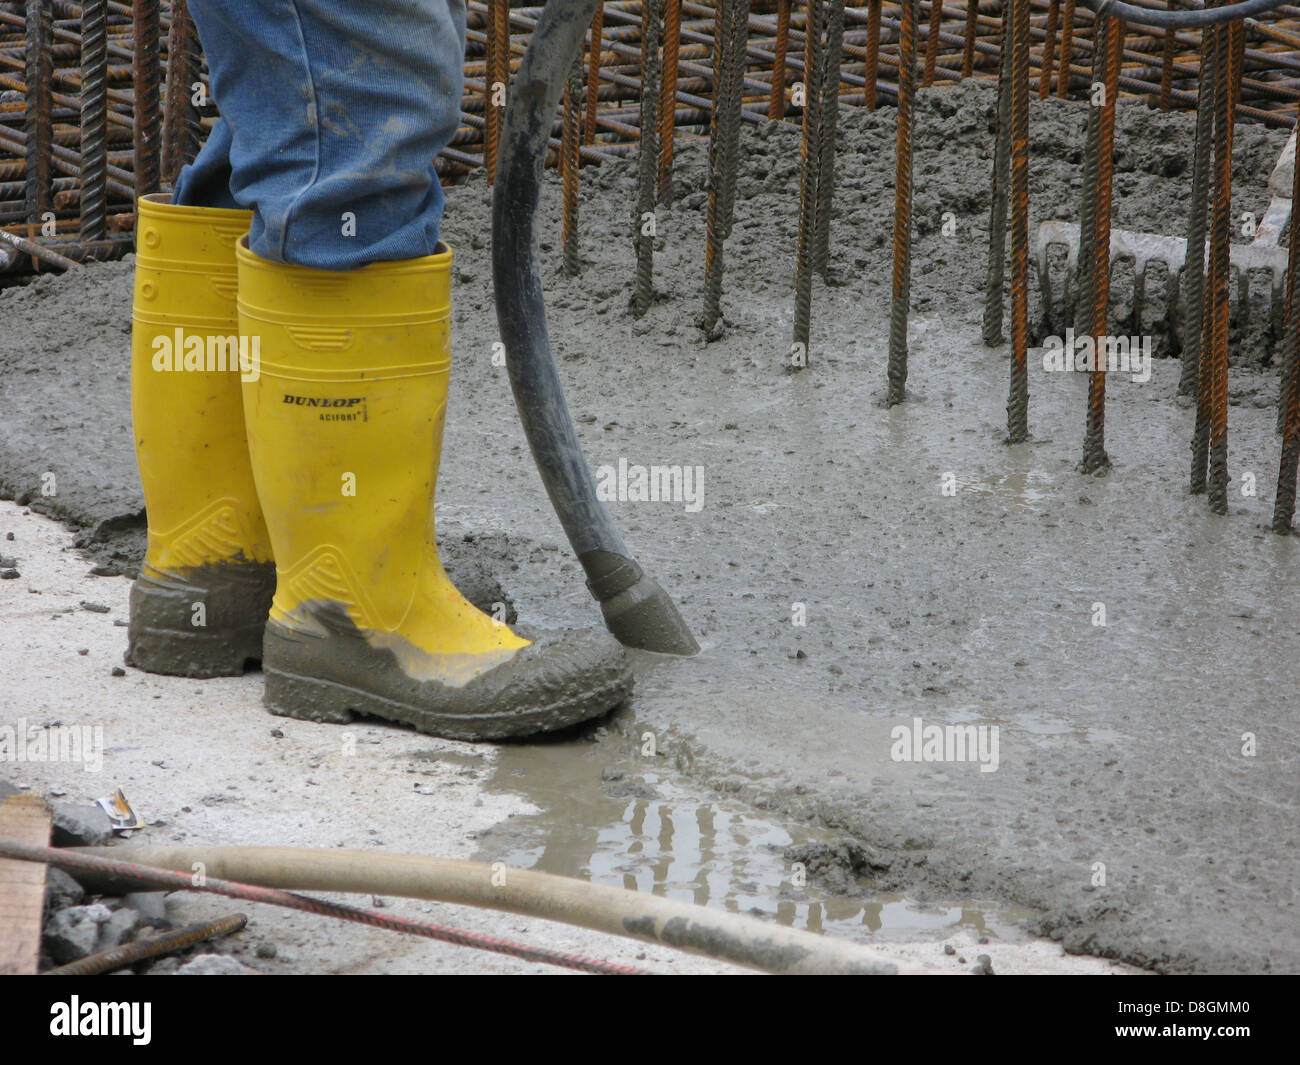 Construction worker Stock Photo